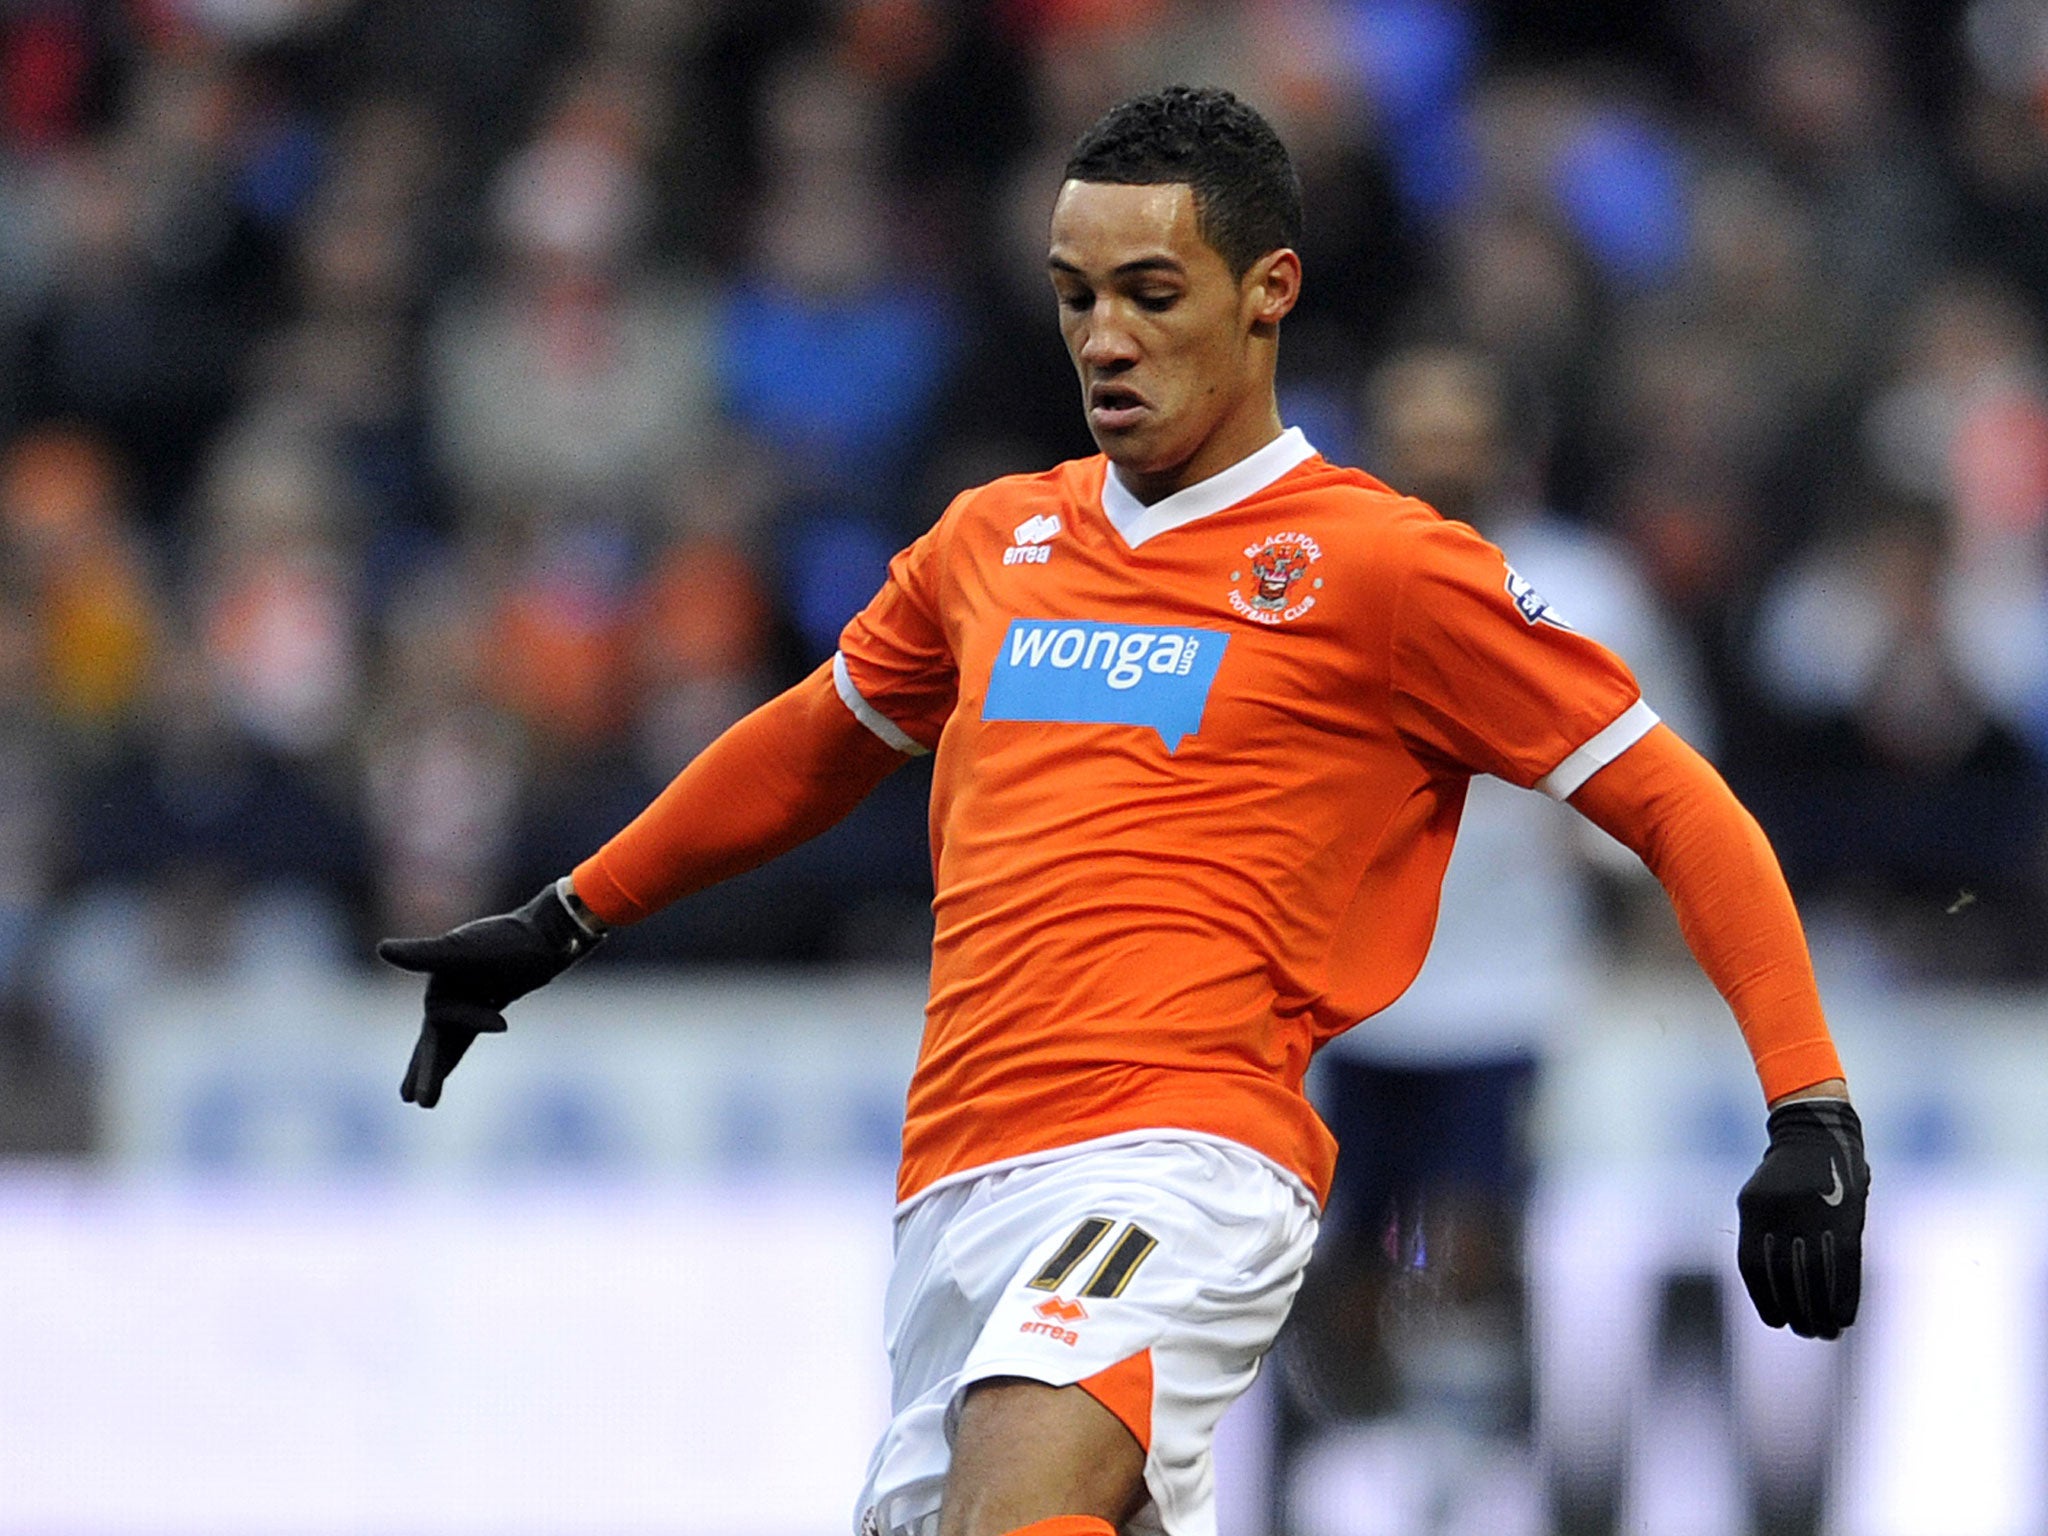 Tom Ince has joined Crystal Palace on loan